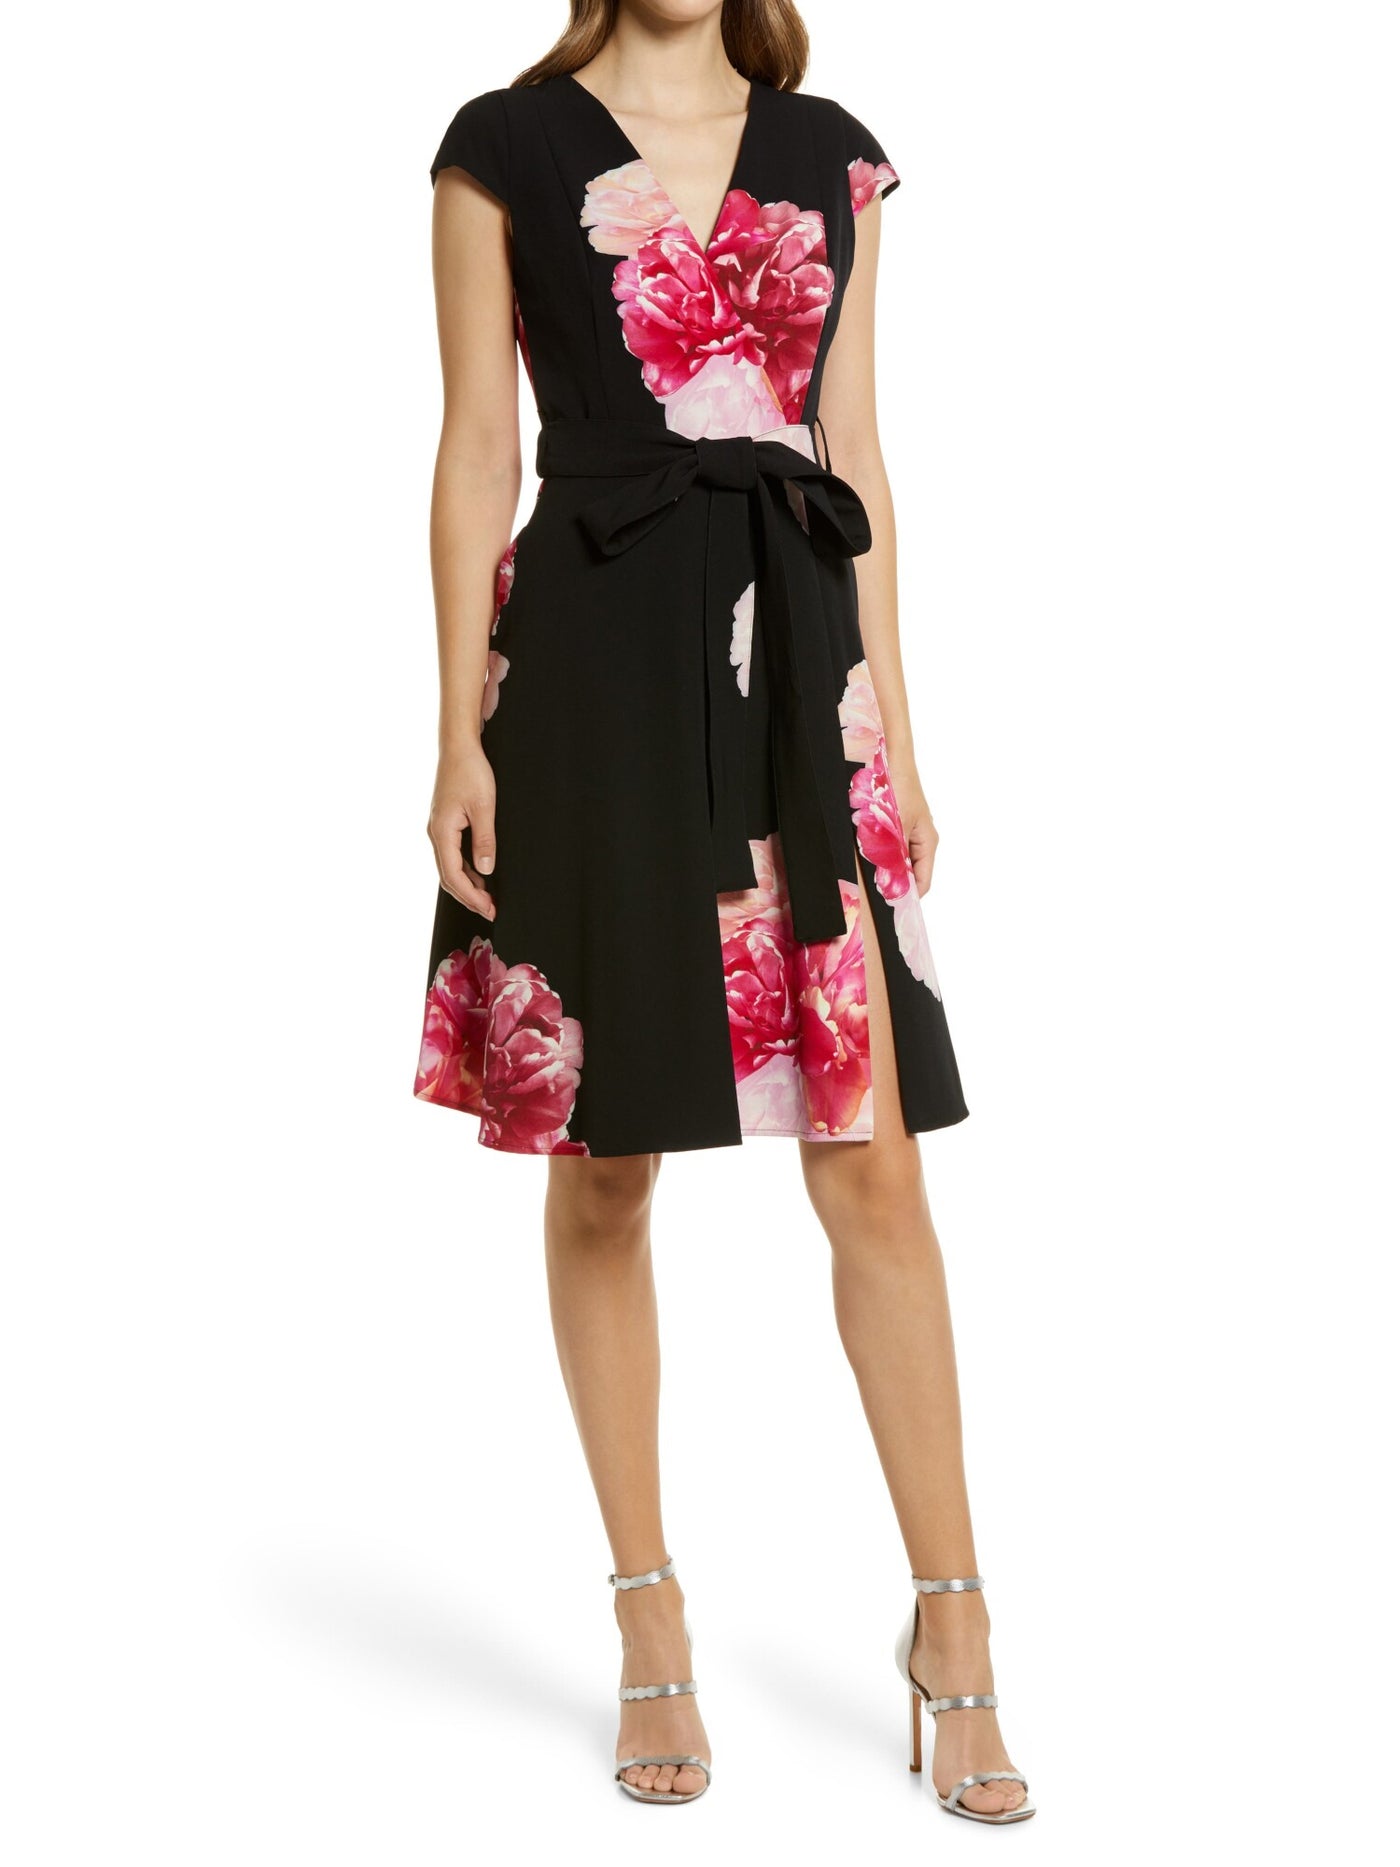 BLACK HALO Womens Black Slitted Zippered Tie-waist Floral Cap Sleeve Surplice Neckline Above The Knee Party Fit + Flare Dress 10